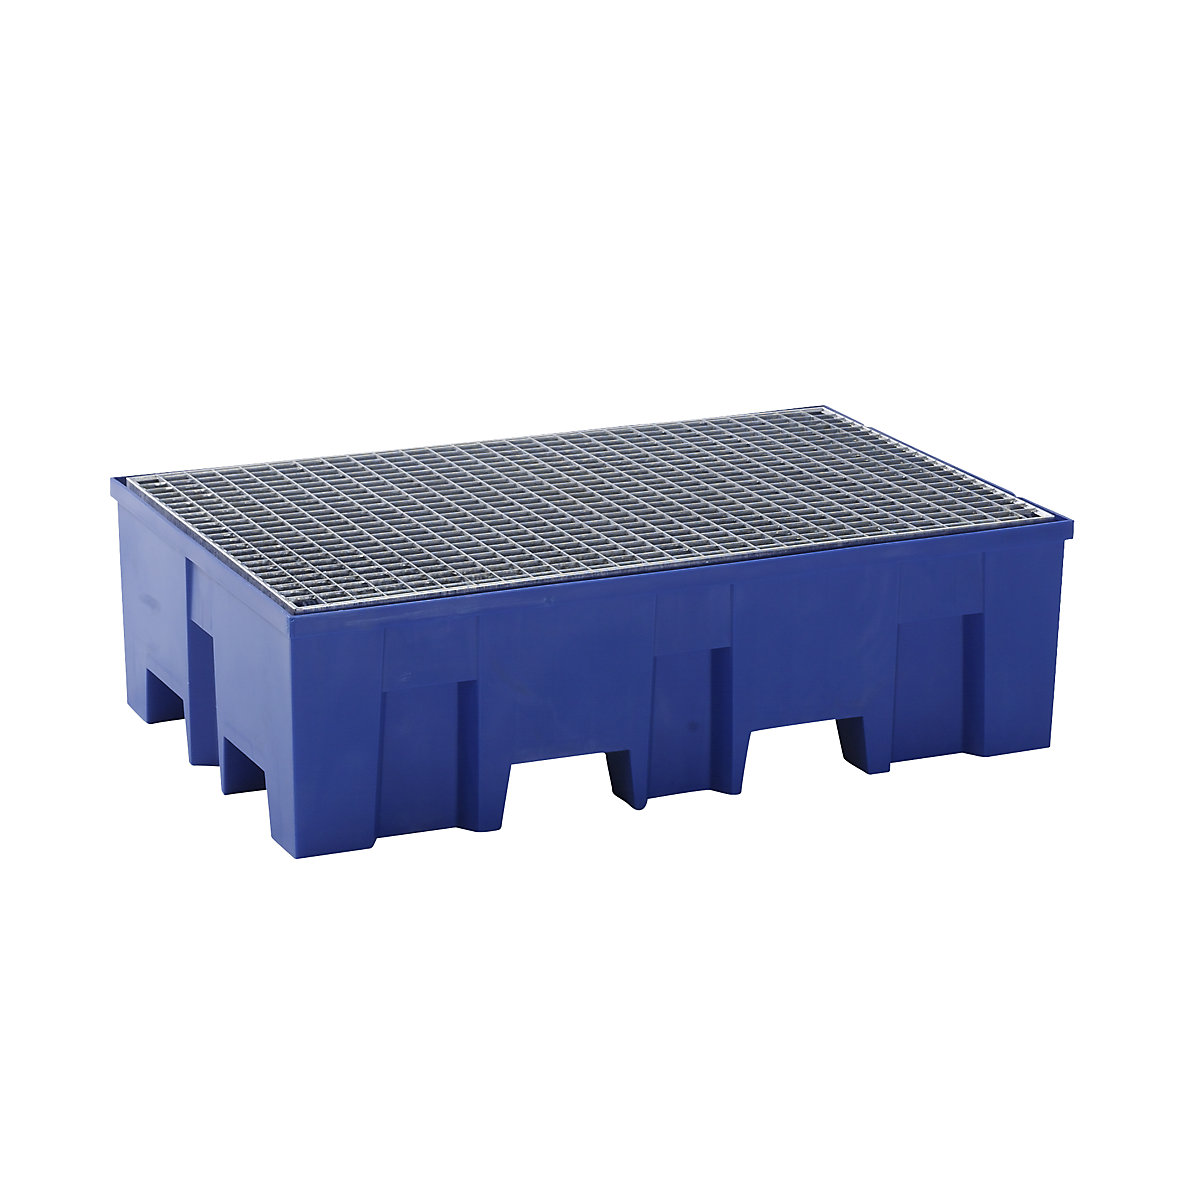 PE sump tray for 2 x 200 litre drums, clearance for forklift, height 350 mm, with zinc plated grate-3